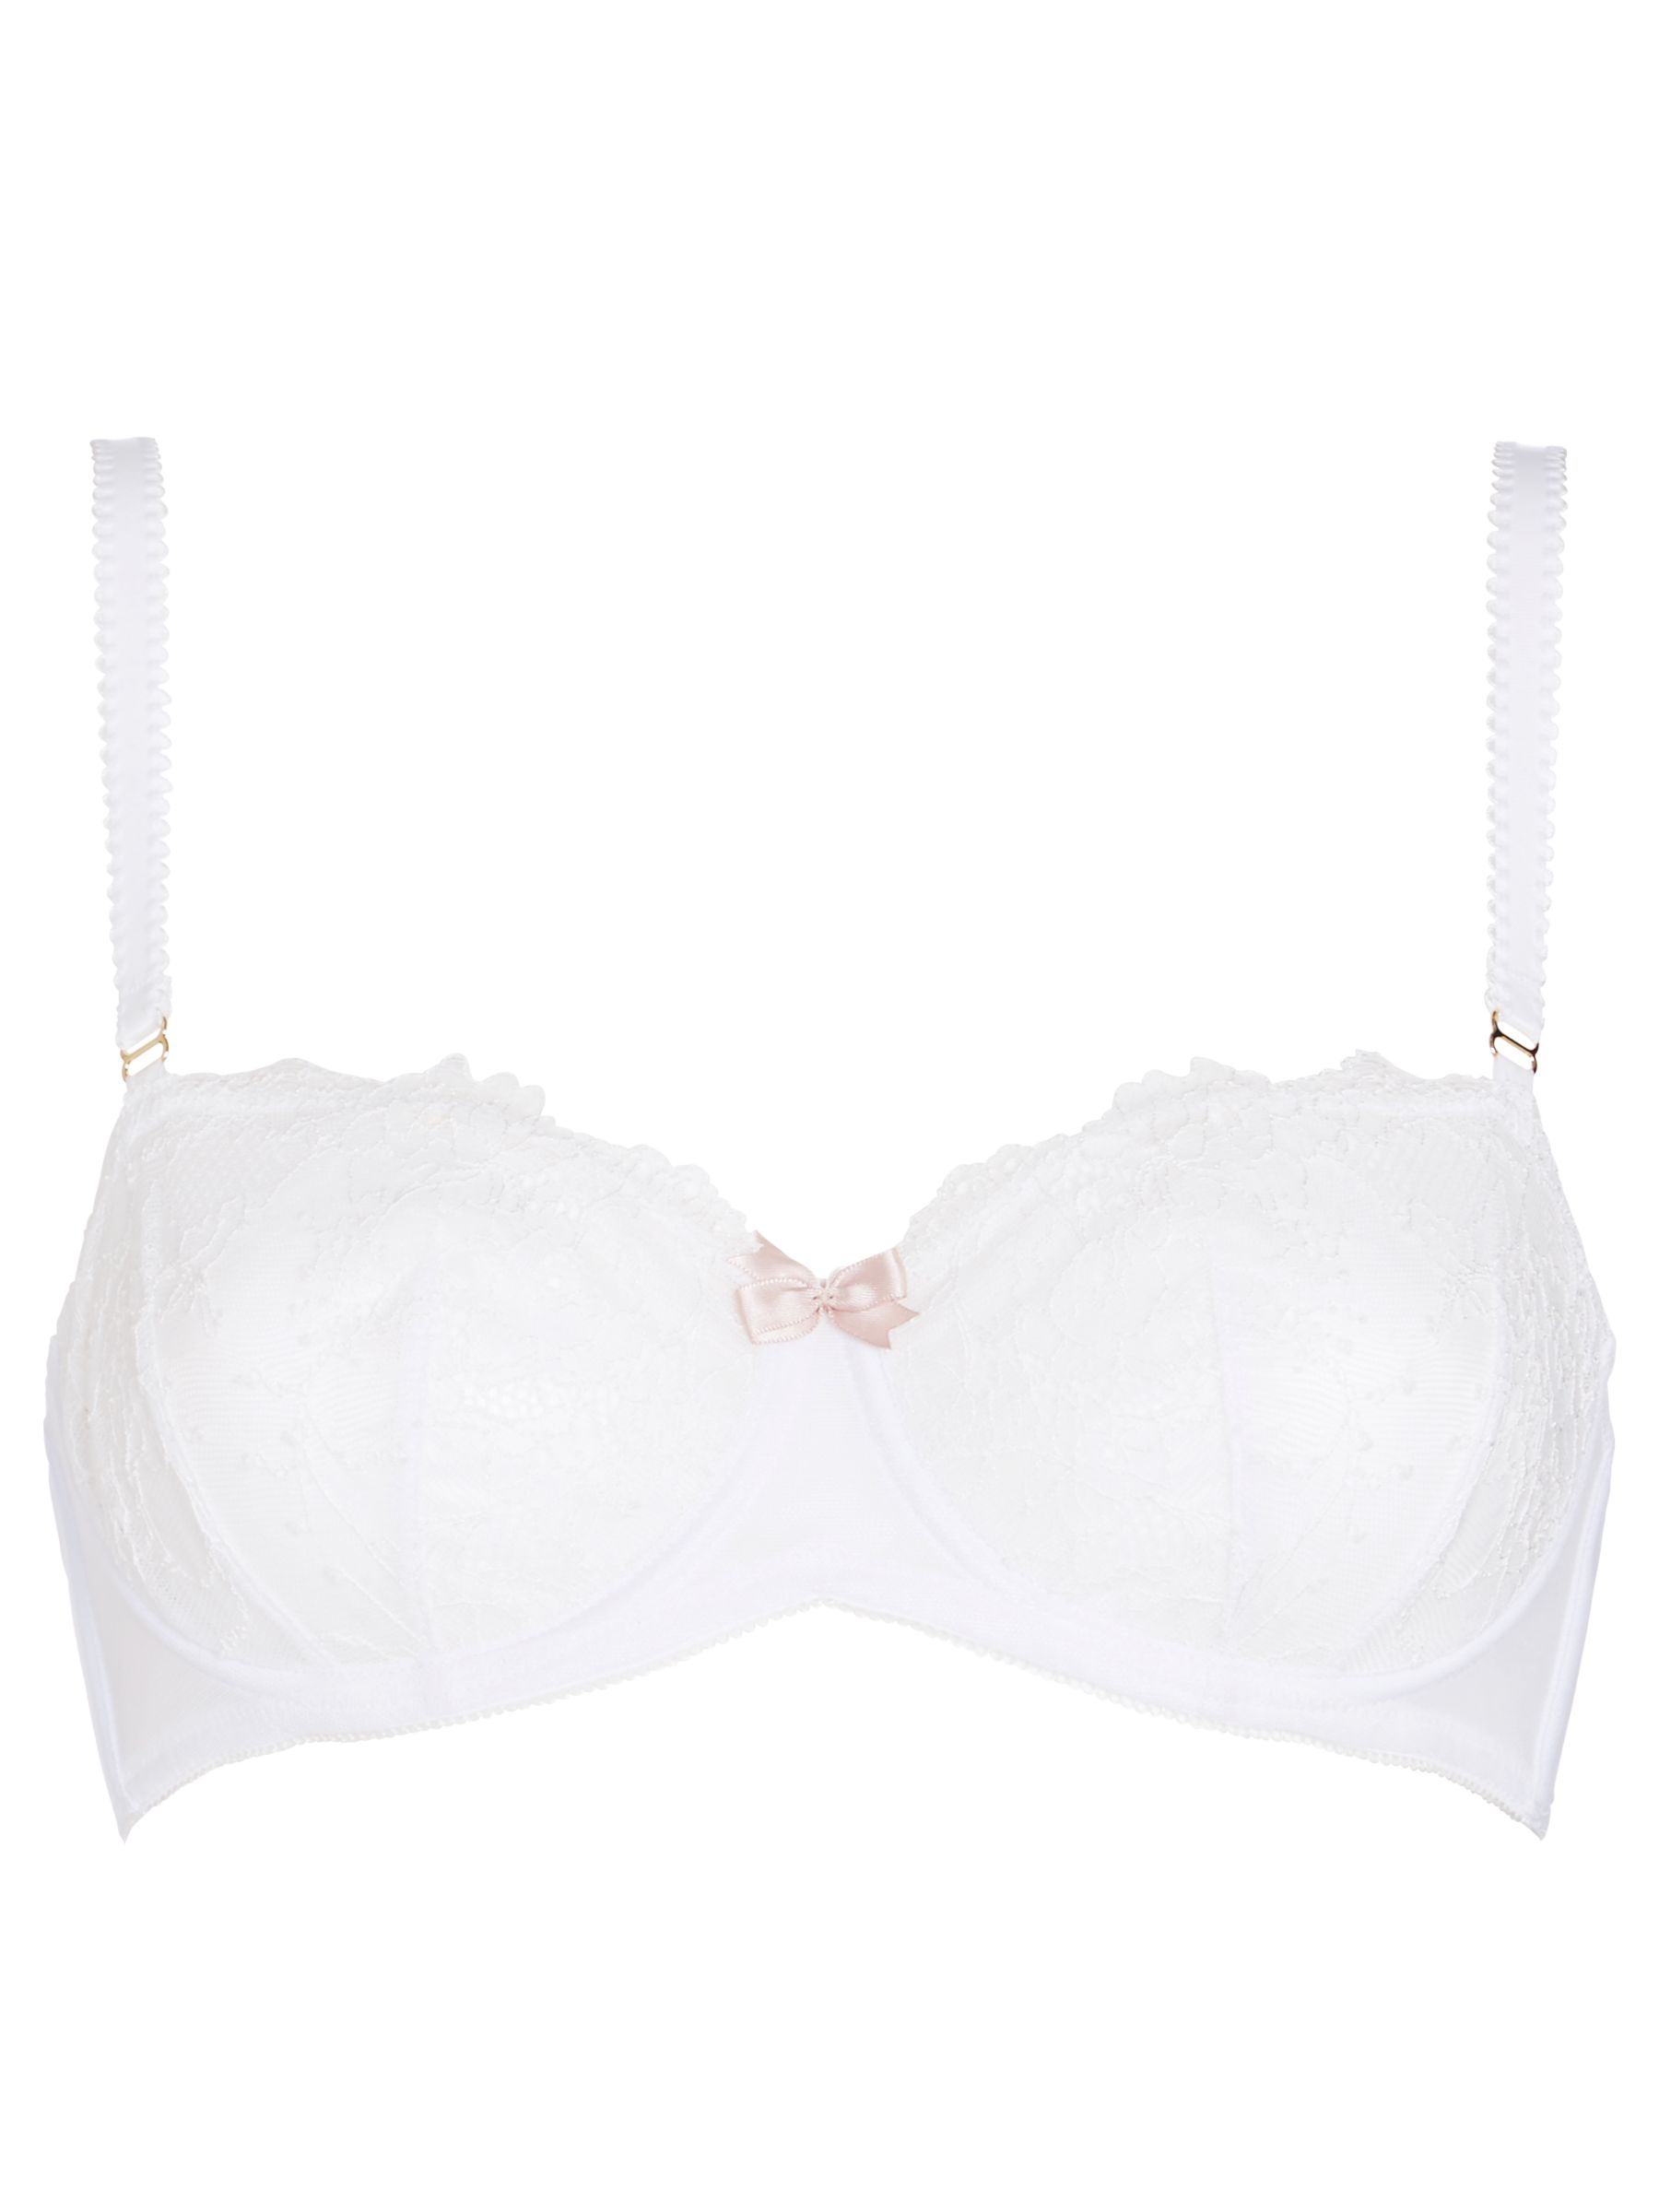 COLLECTION by John Lewis Genevieve Lace Non-Padded Balcony Bra, White